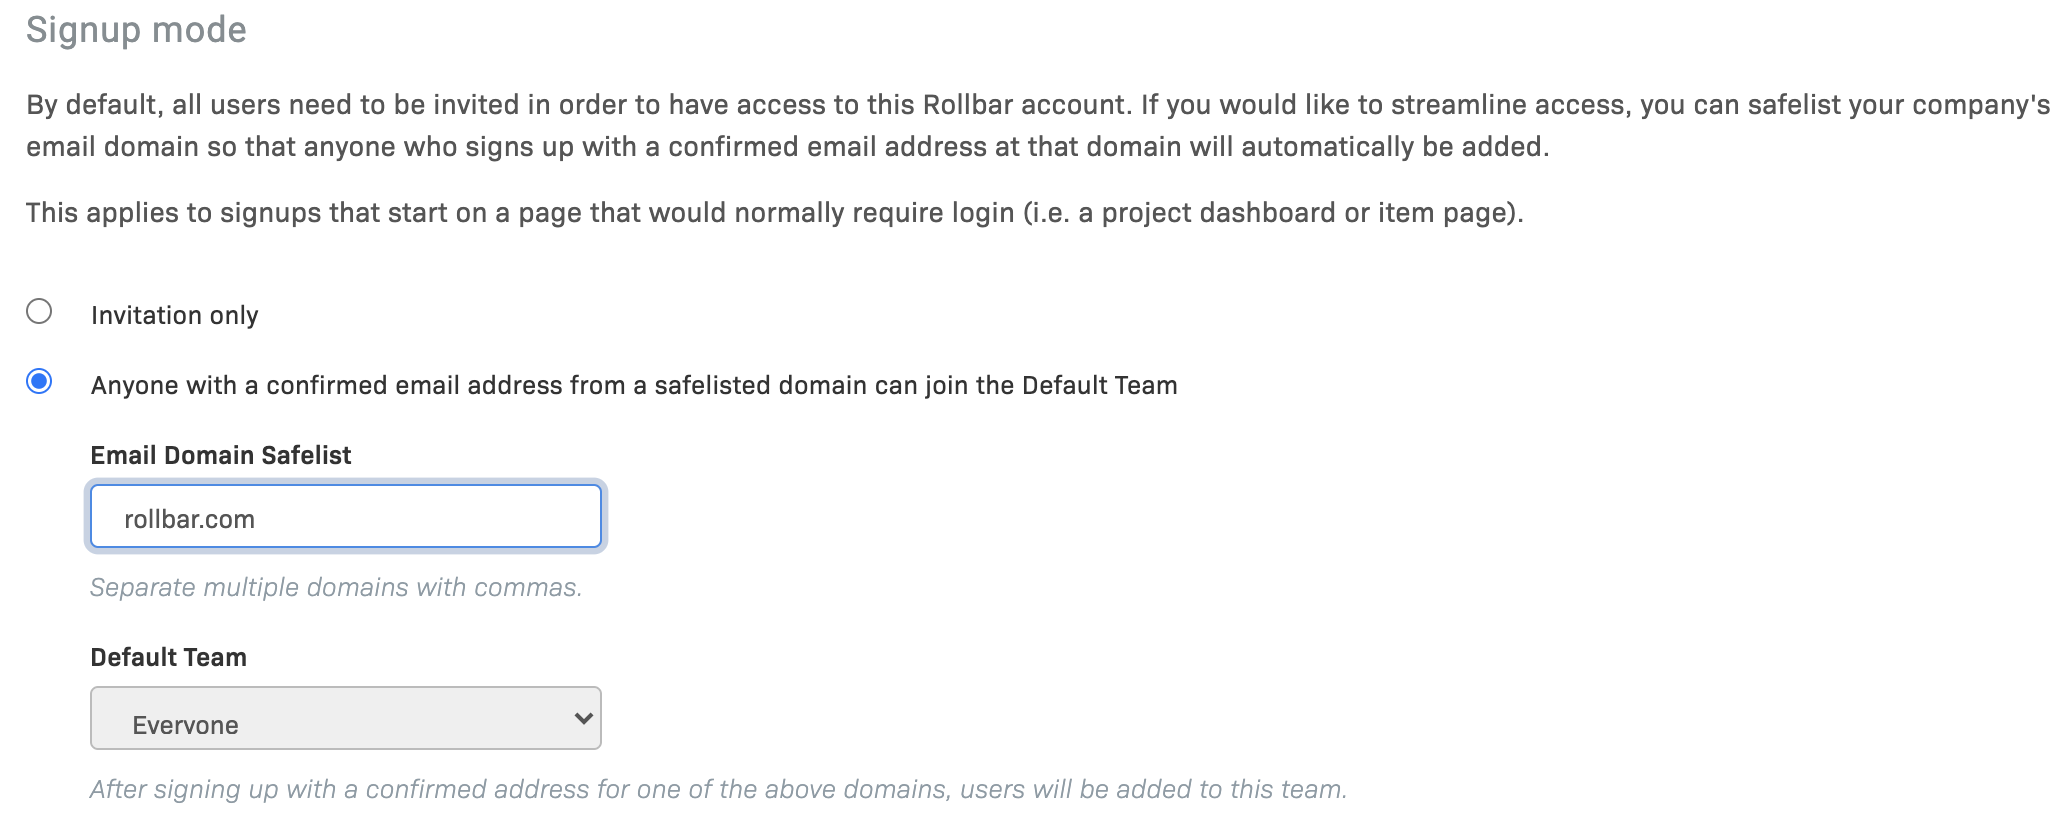 An example of the domain whitelist option configured to allow signups for users with a rollbar.com email address